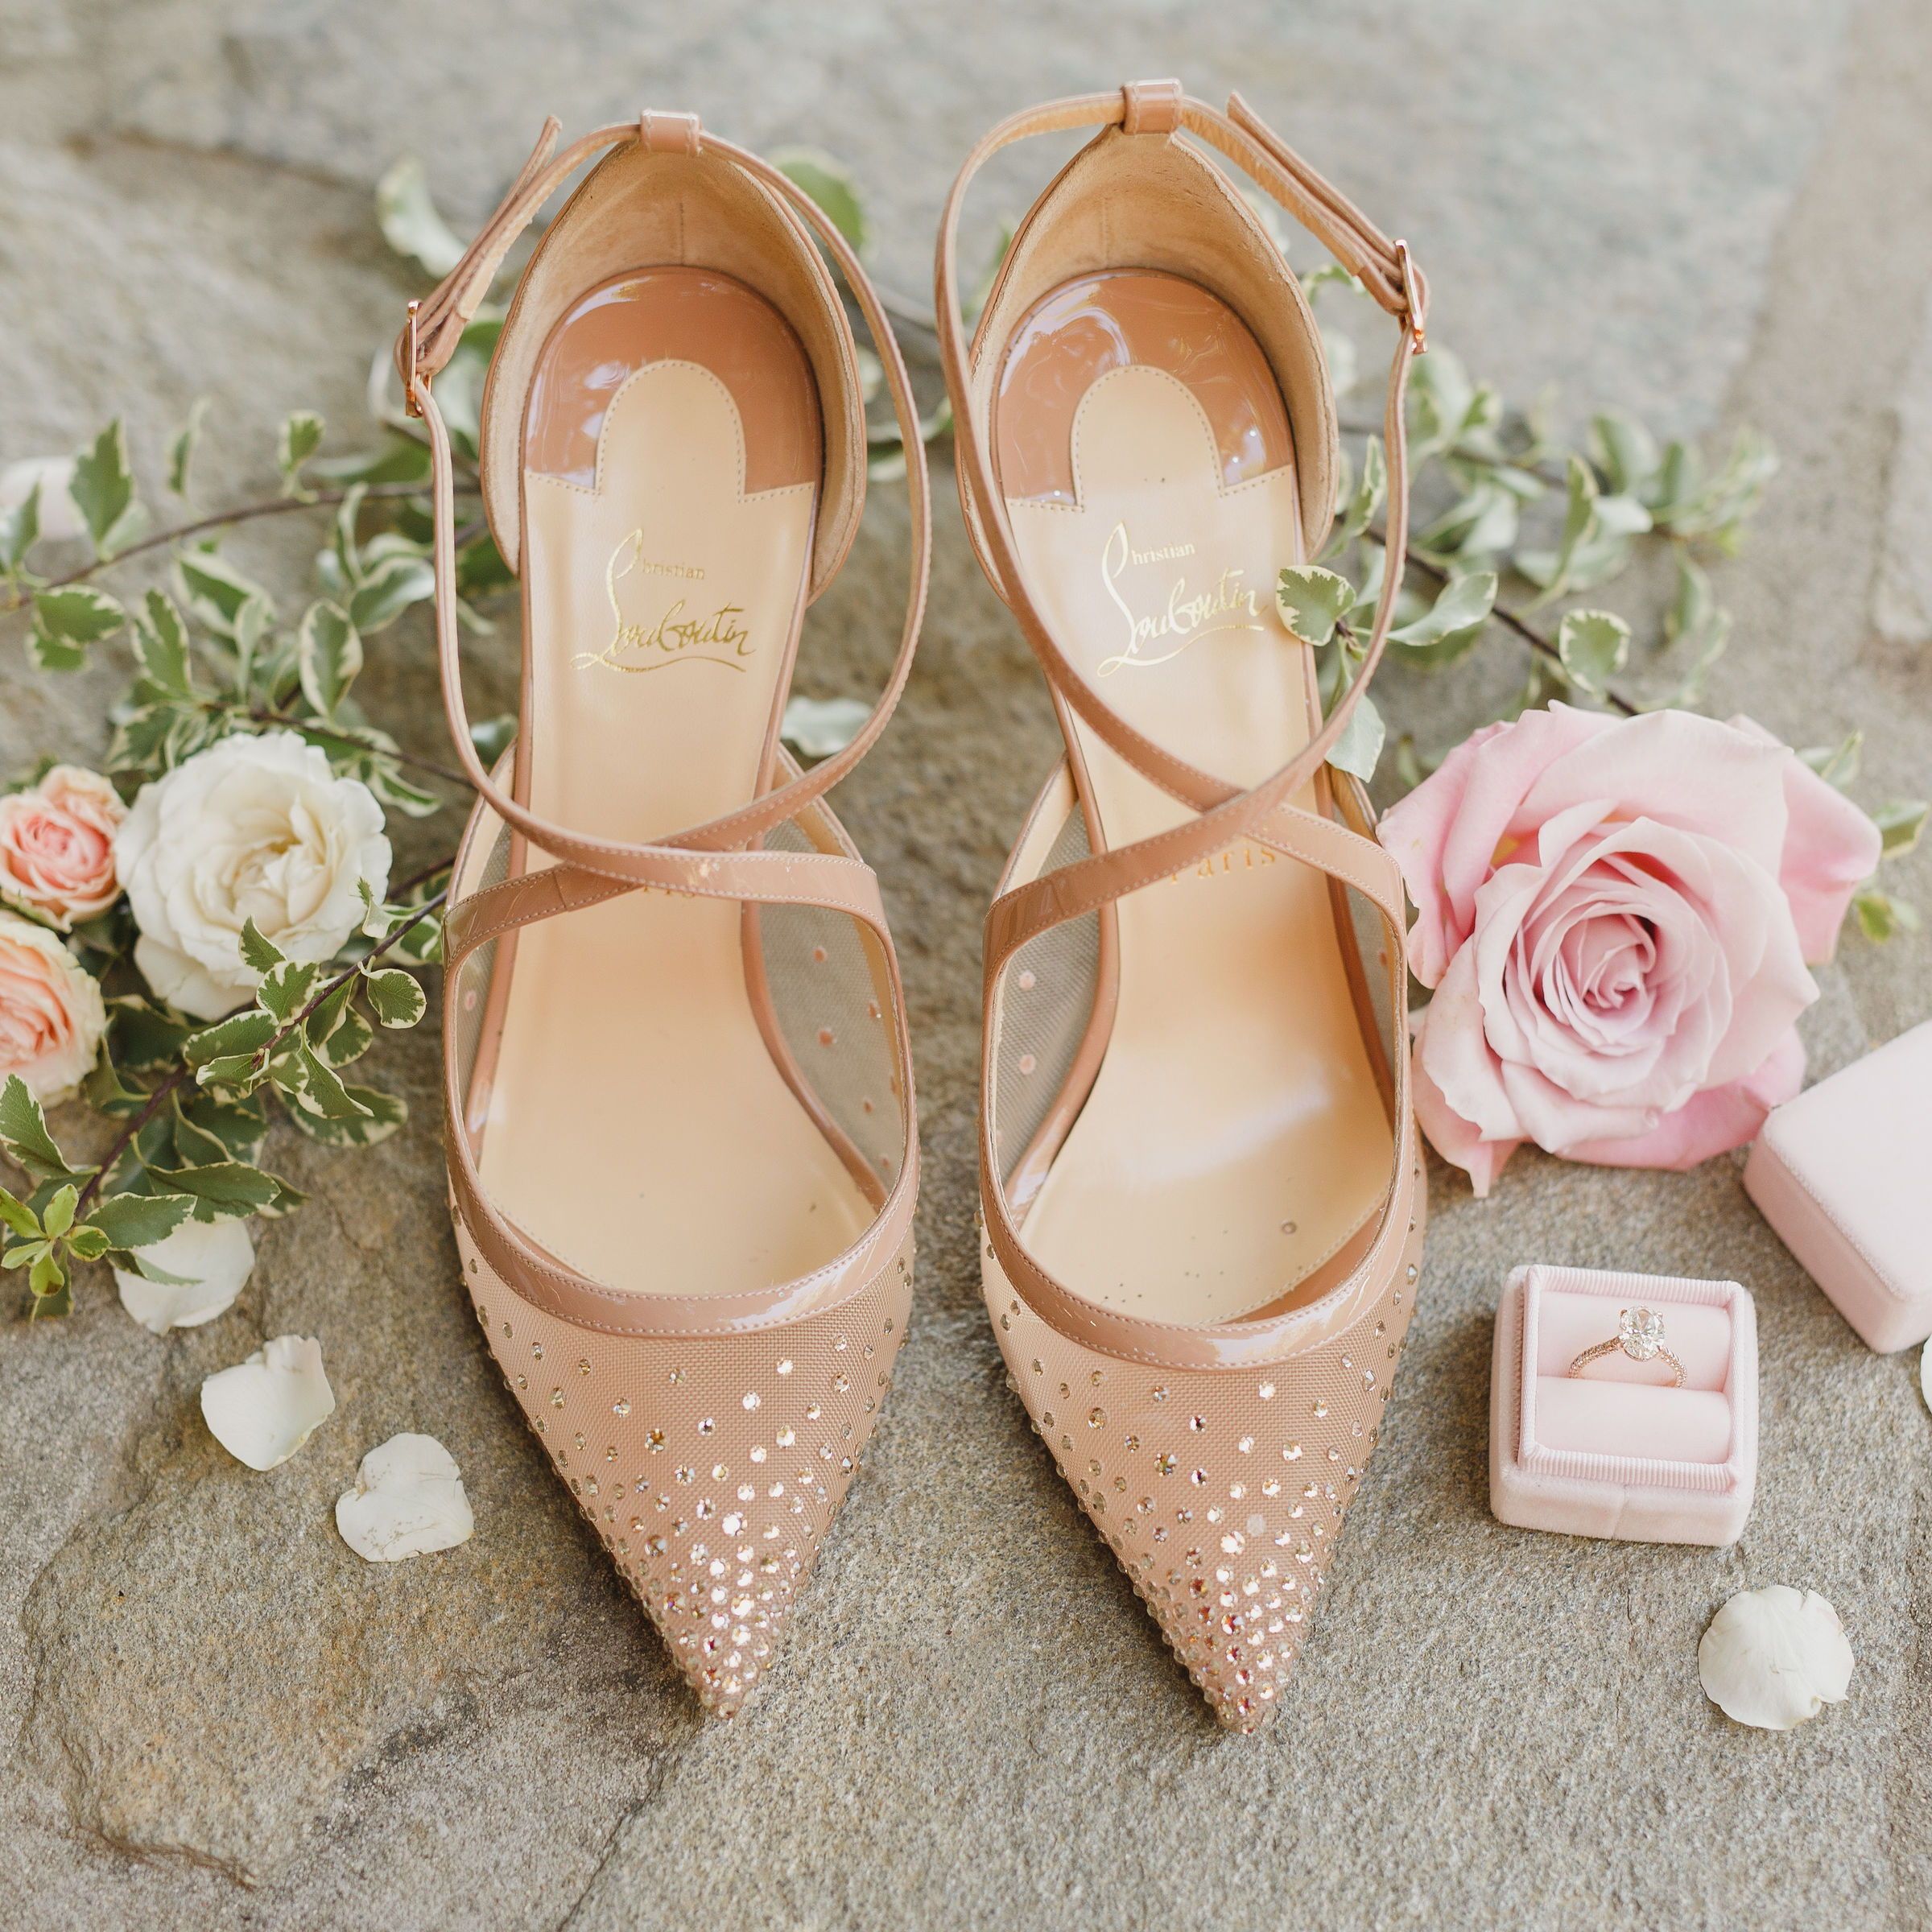 Top 10 Beautiful Nude Wedding Shoes for Christian Marriages